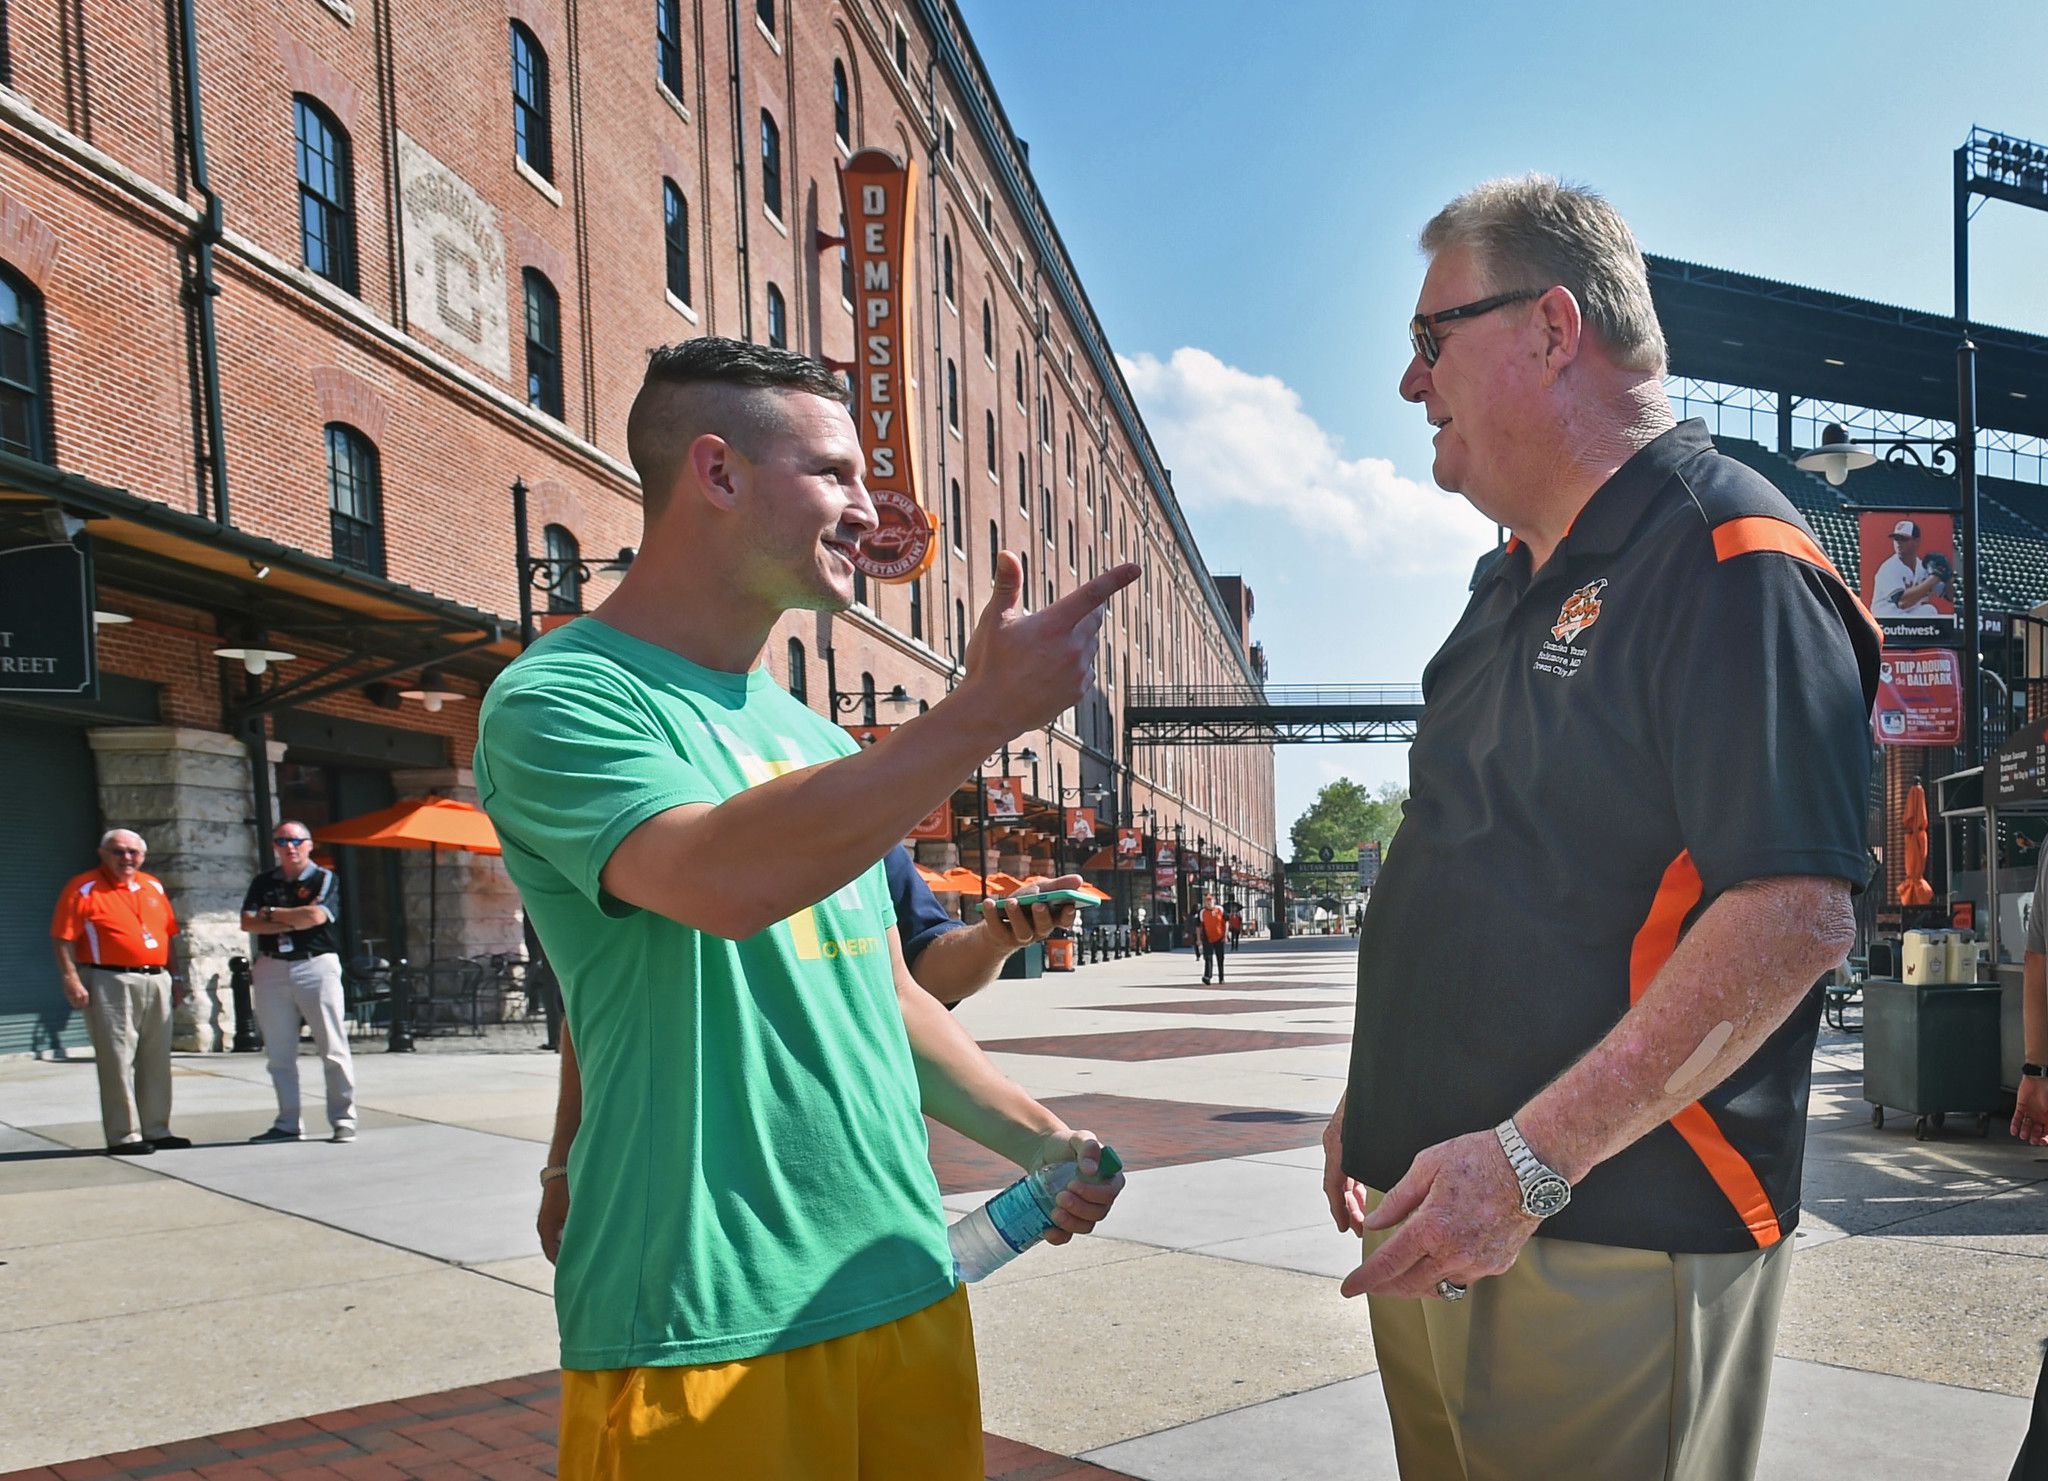 Boog Powell, Baltimore Oriole Legend, BBQ King - Images